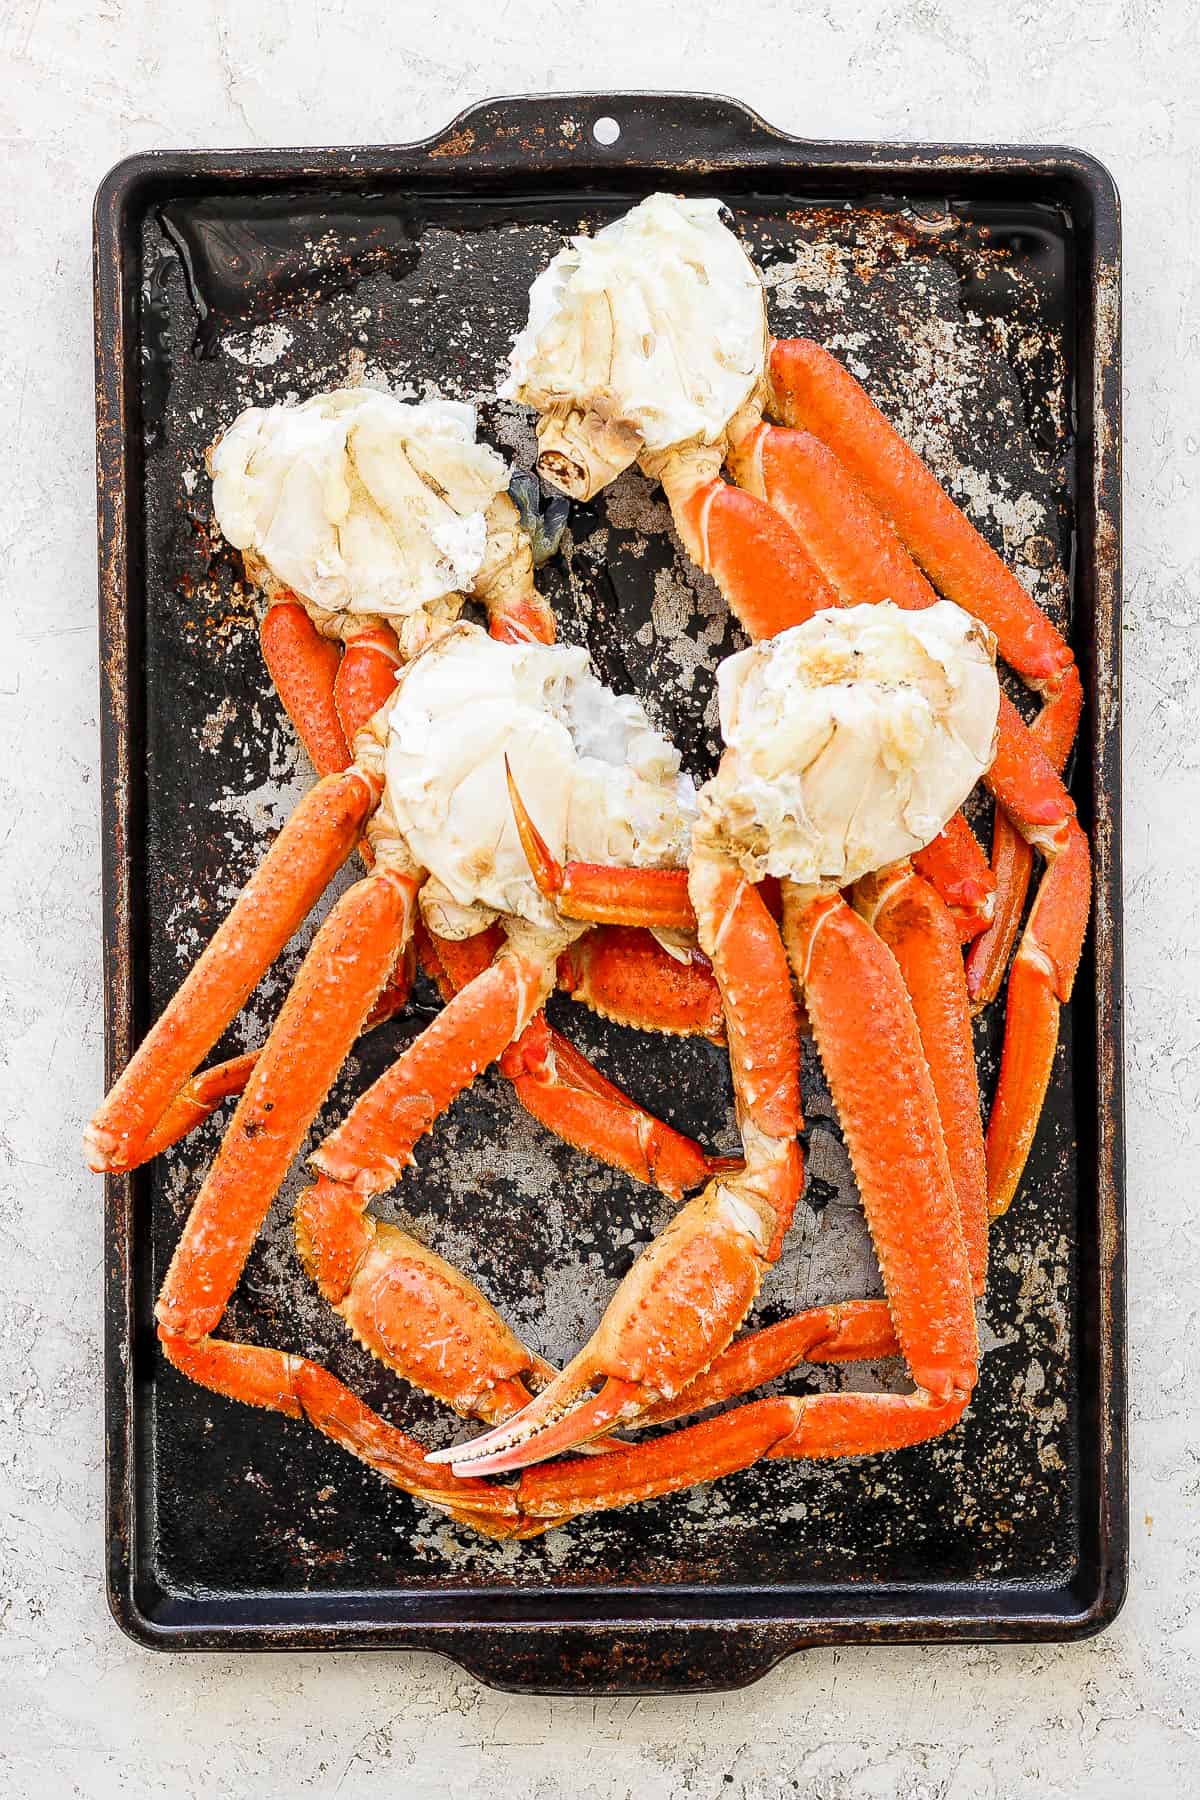 Boiled crab legs on a baking sheet after cooking.